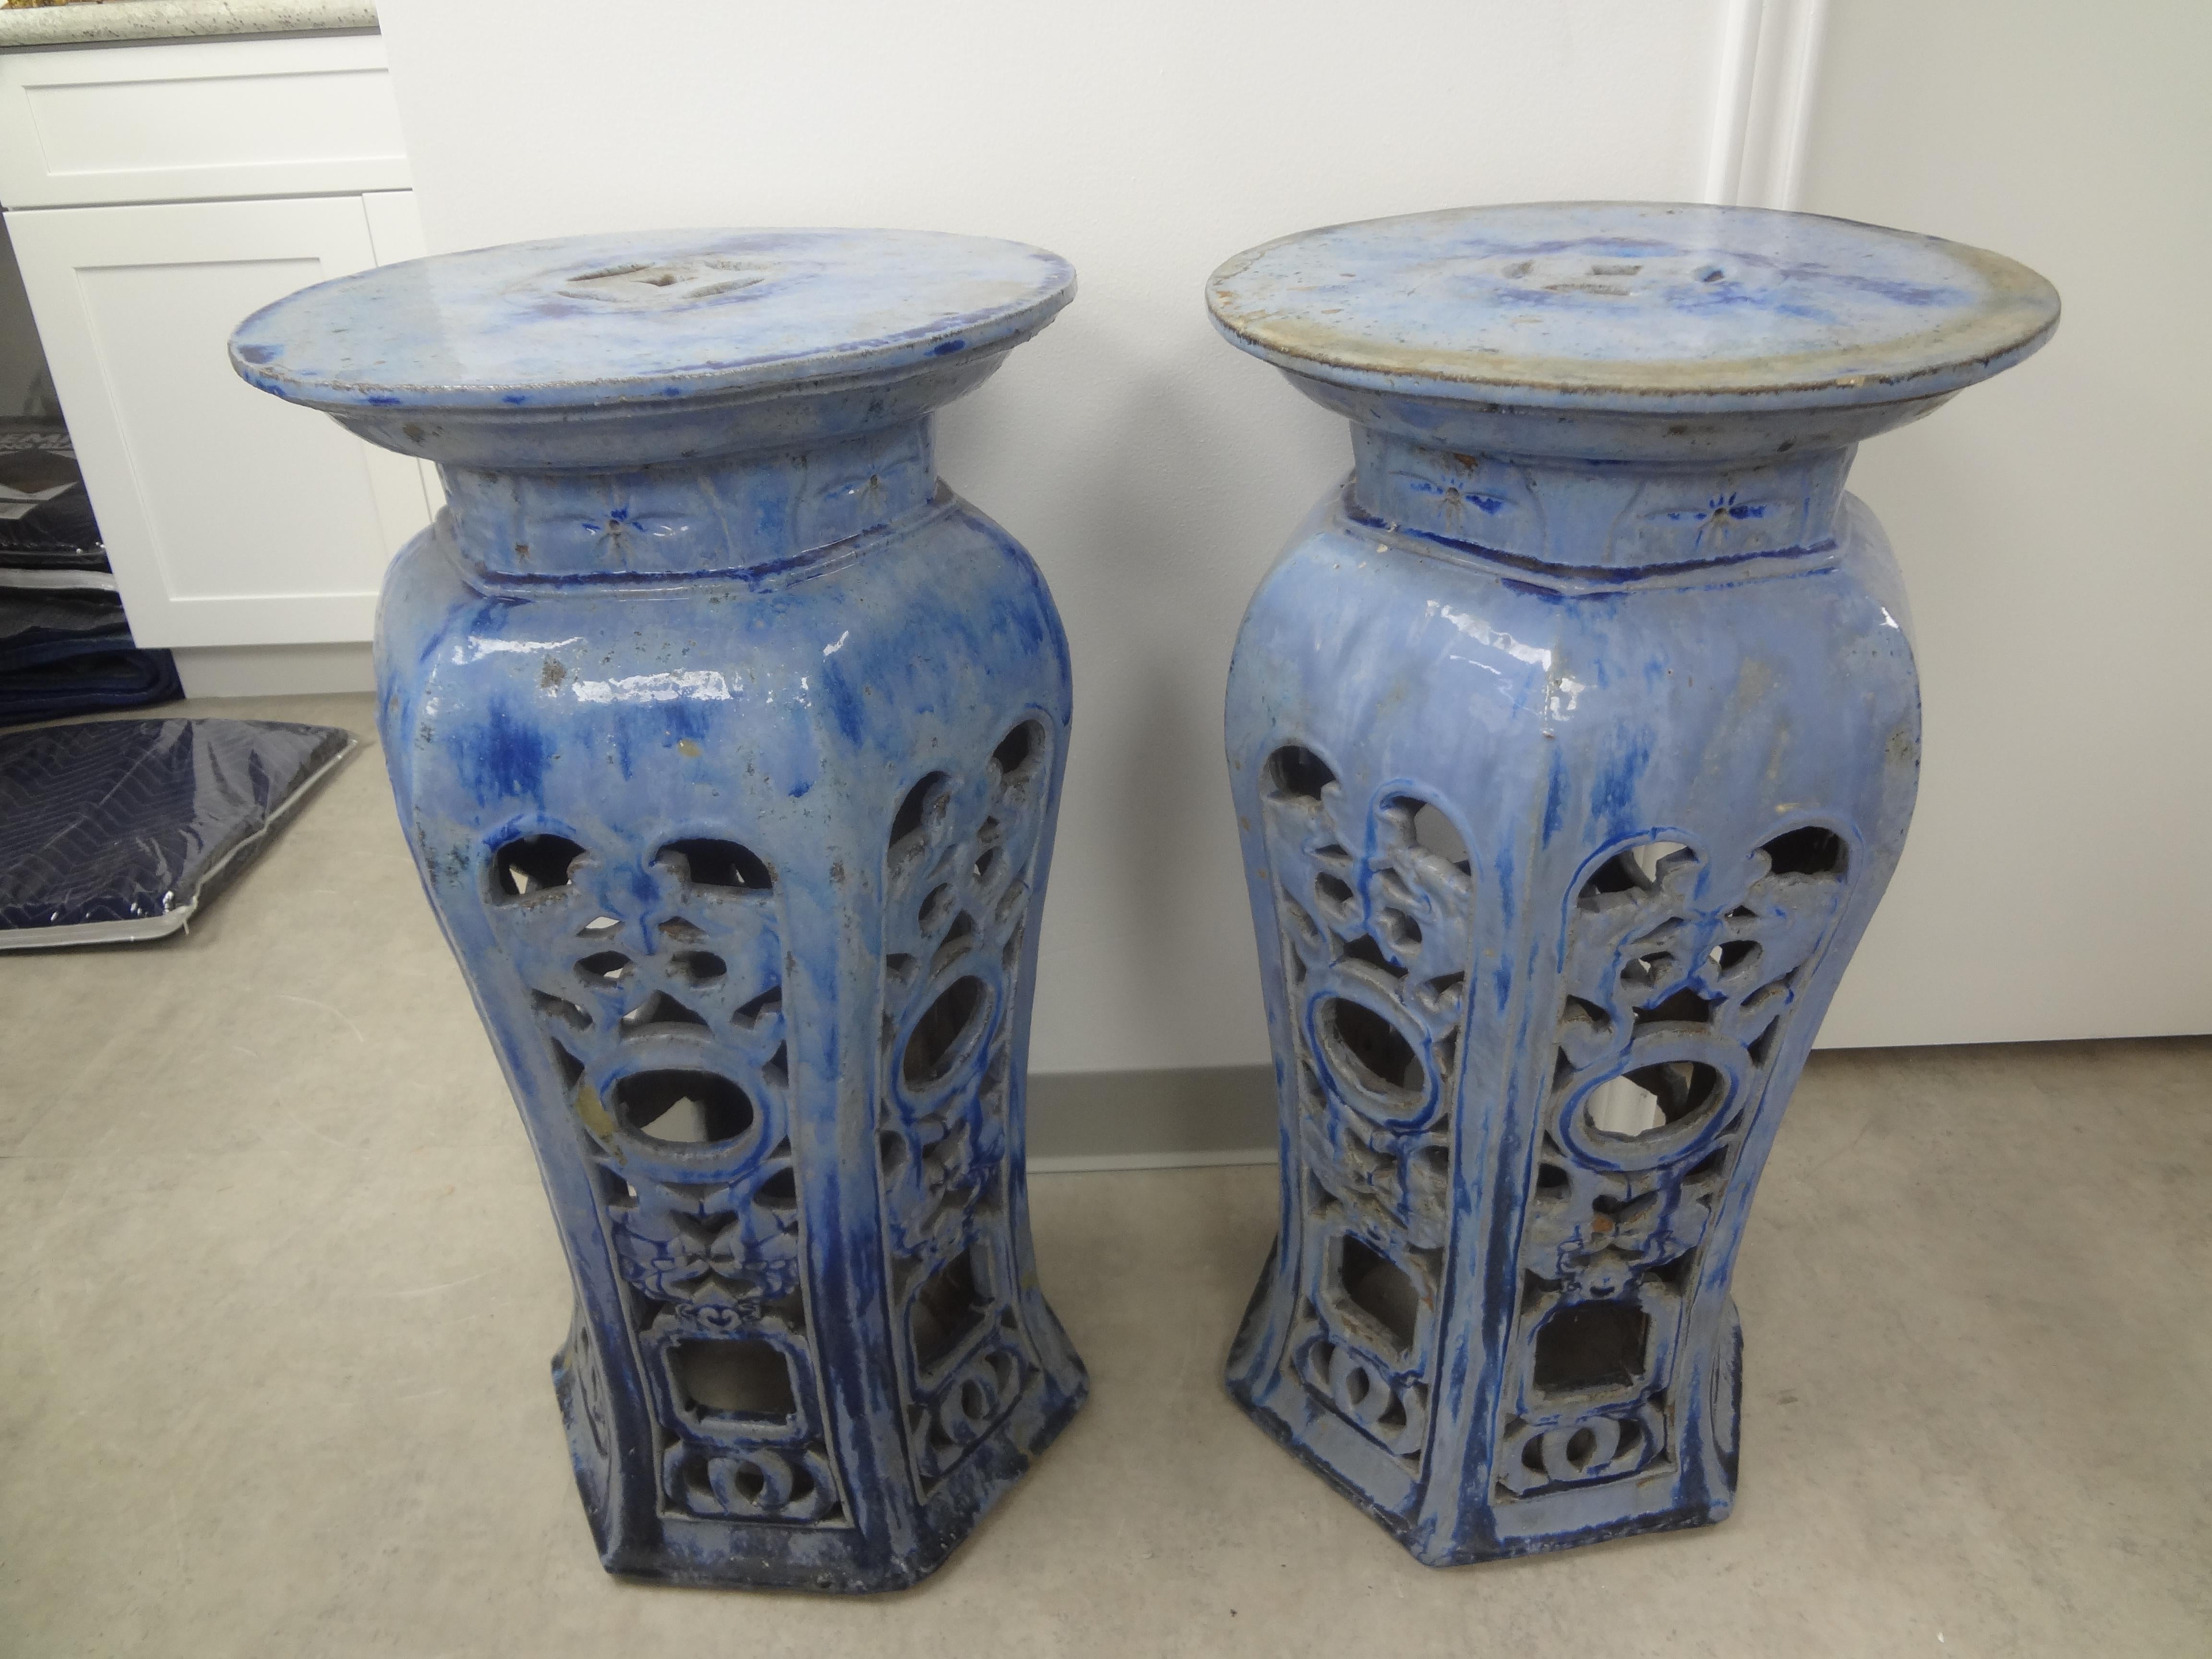 Pair of Early 20th Century Chinese Glazed Terra Cotta Pedestals or Stands For Sale 3